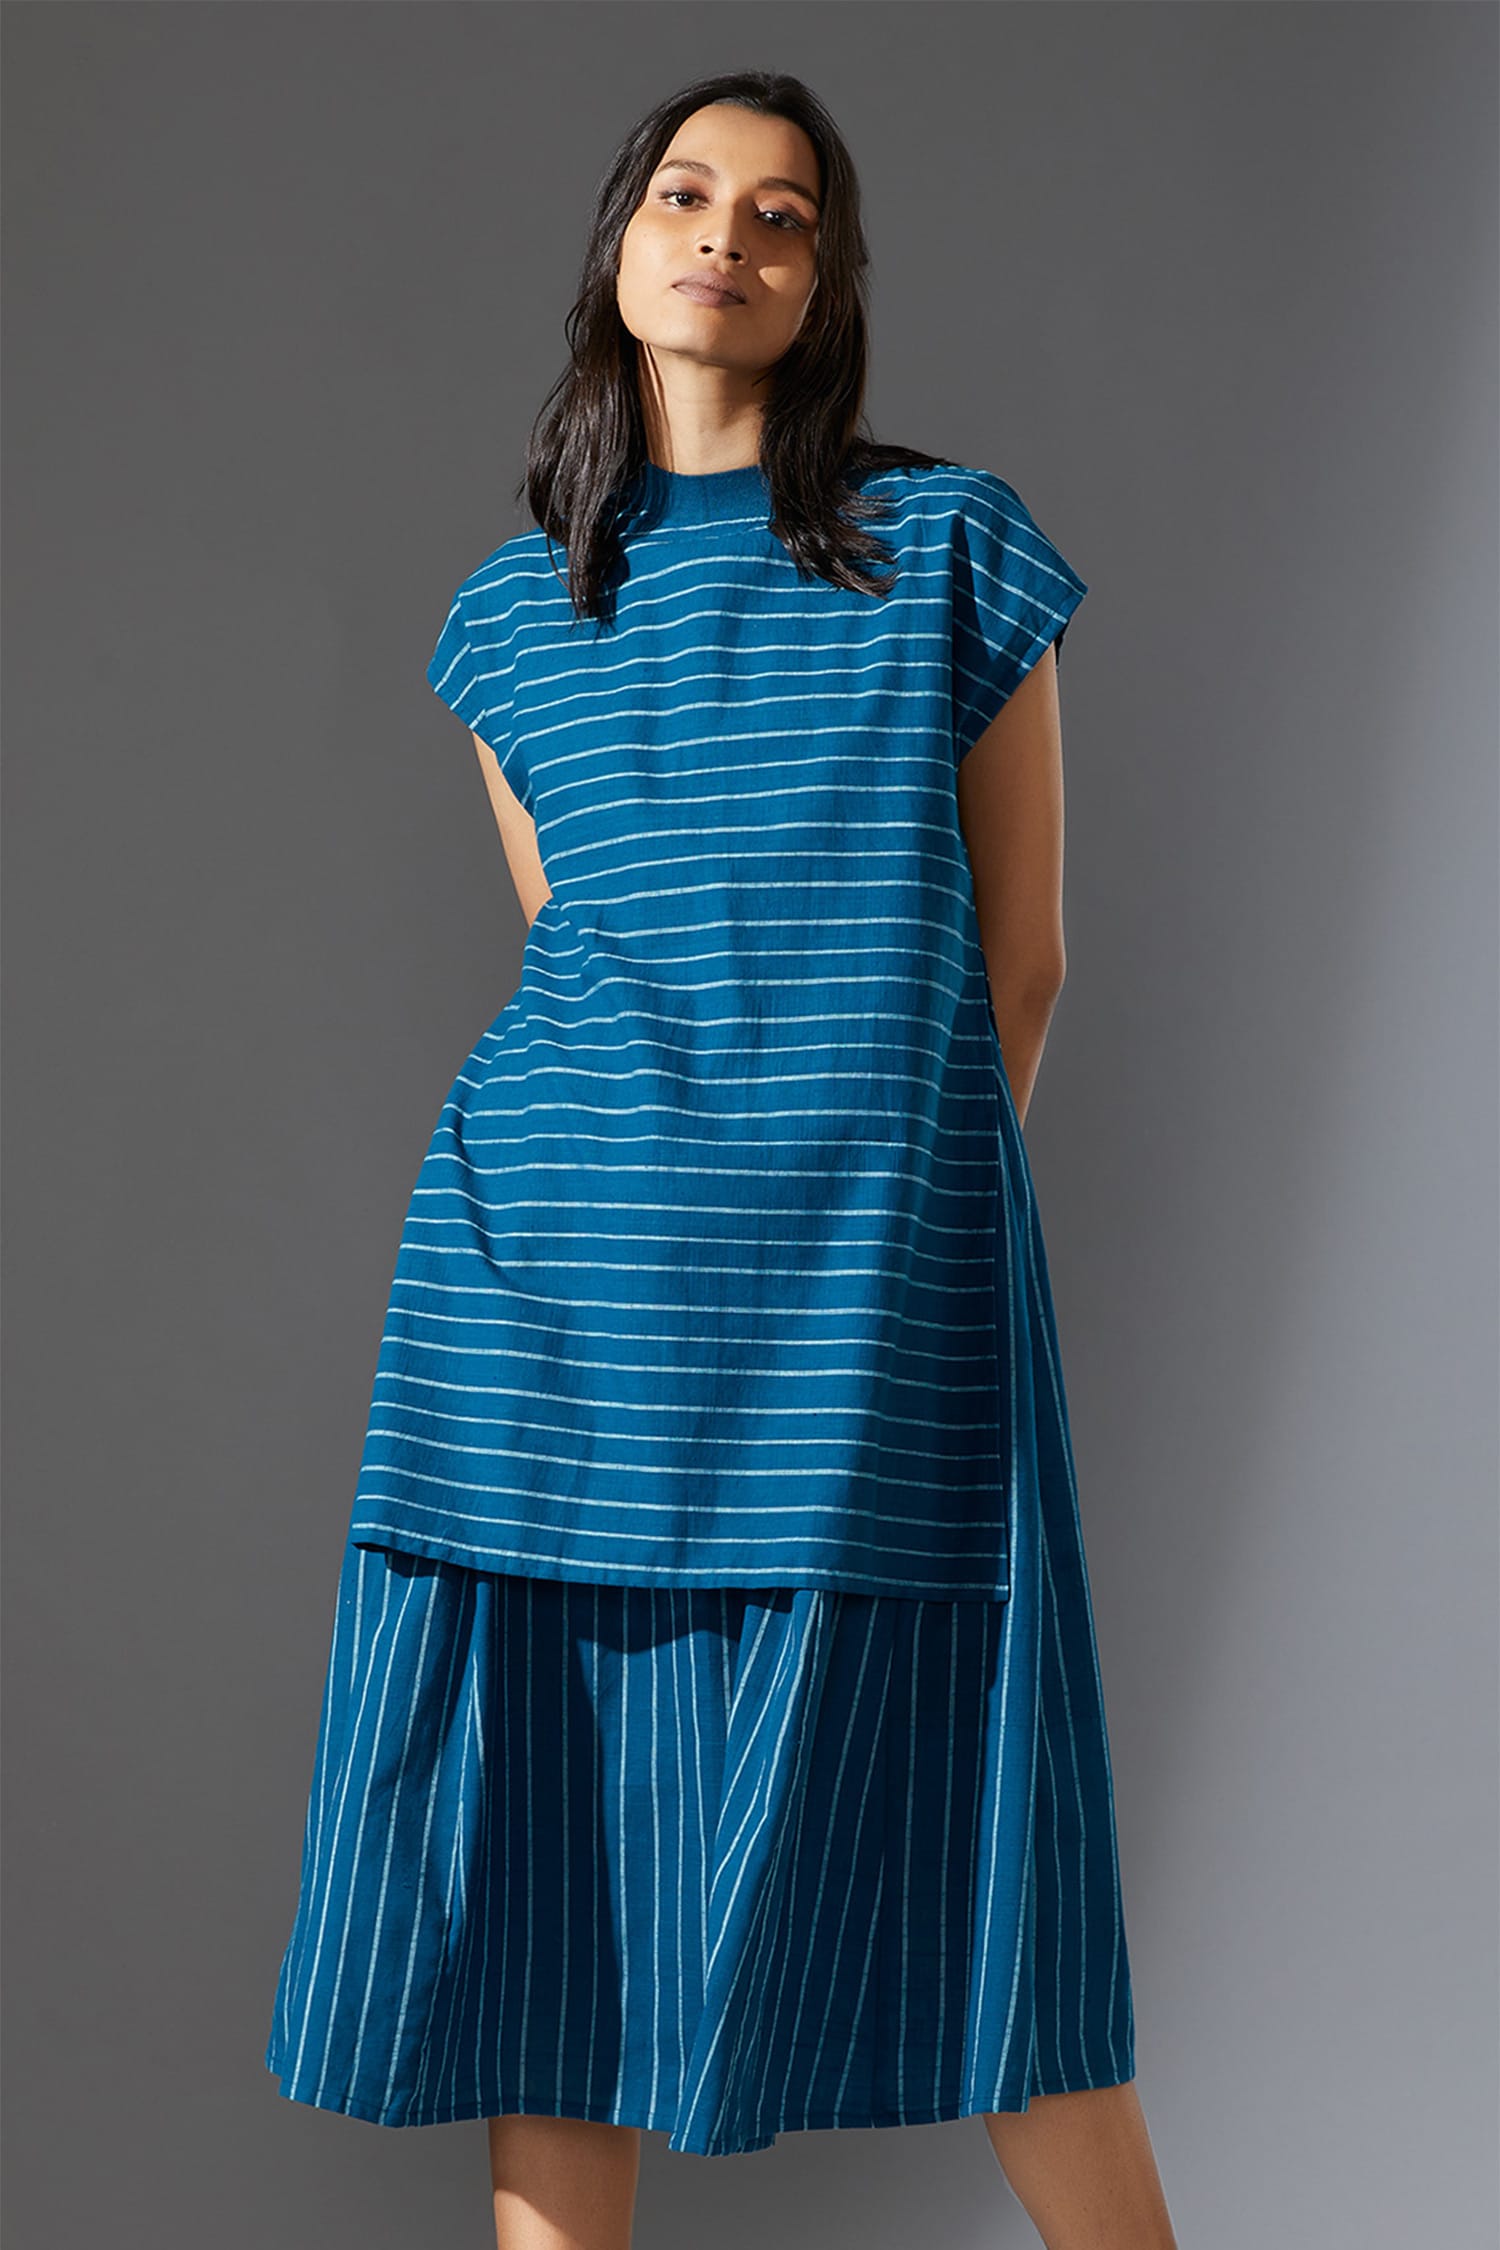 Buy Blue Cotton Striped Dress For Women by Mati Online at Aza Fashions.